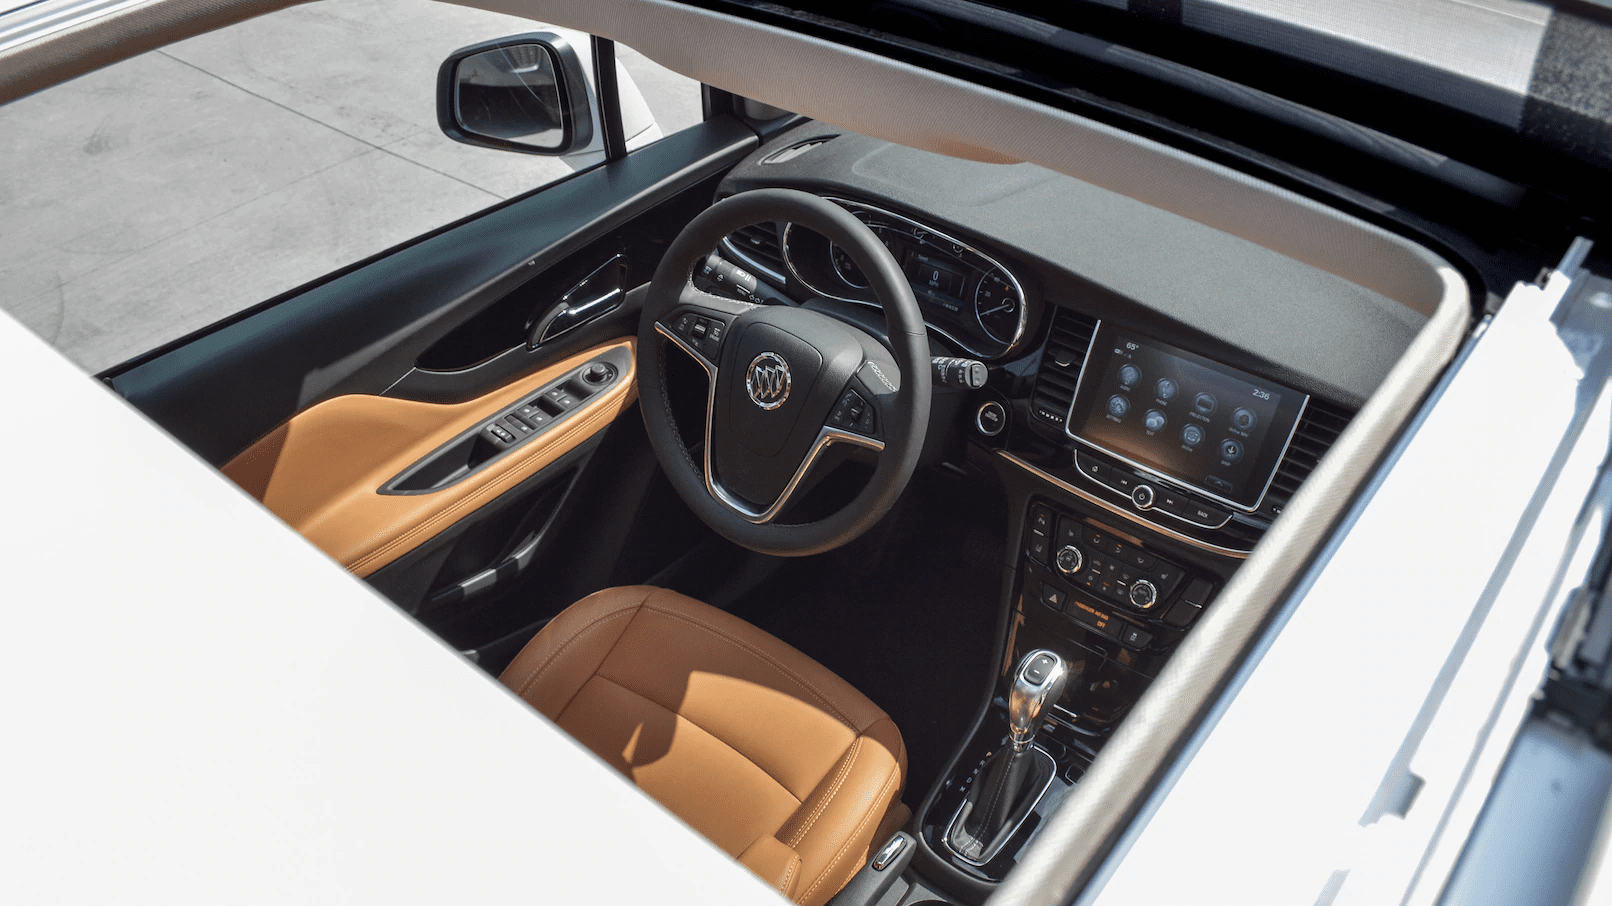 2019 Buick Encore interior from the sunroof, brown leather seats